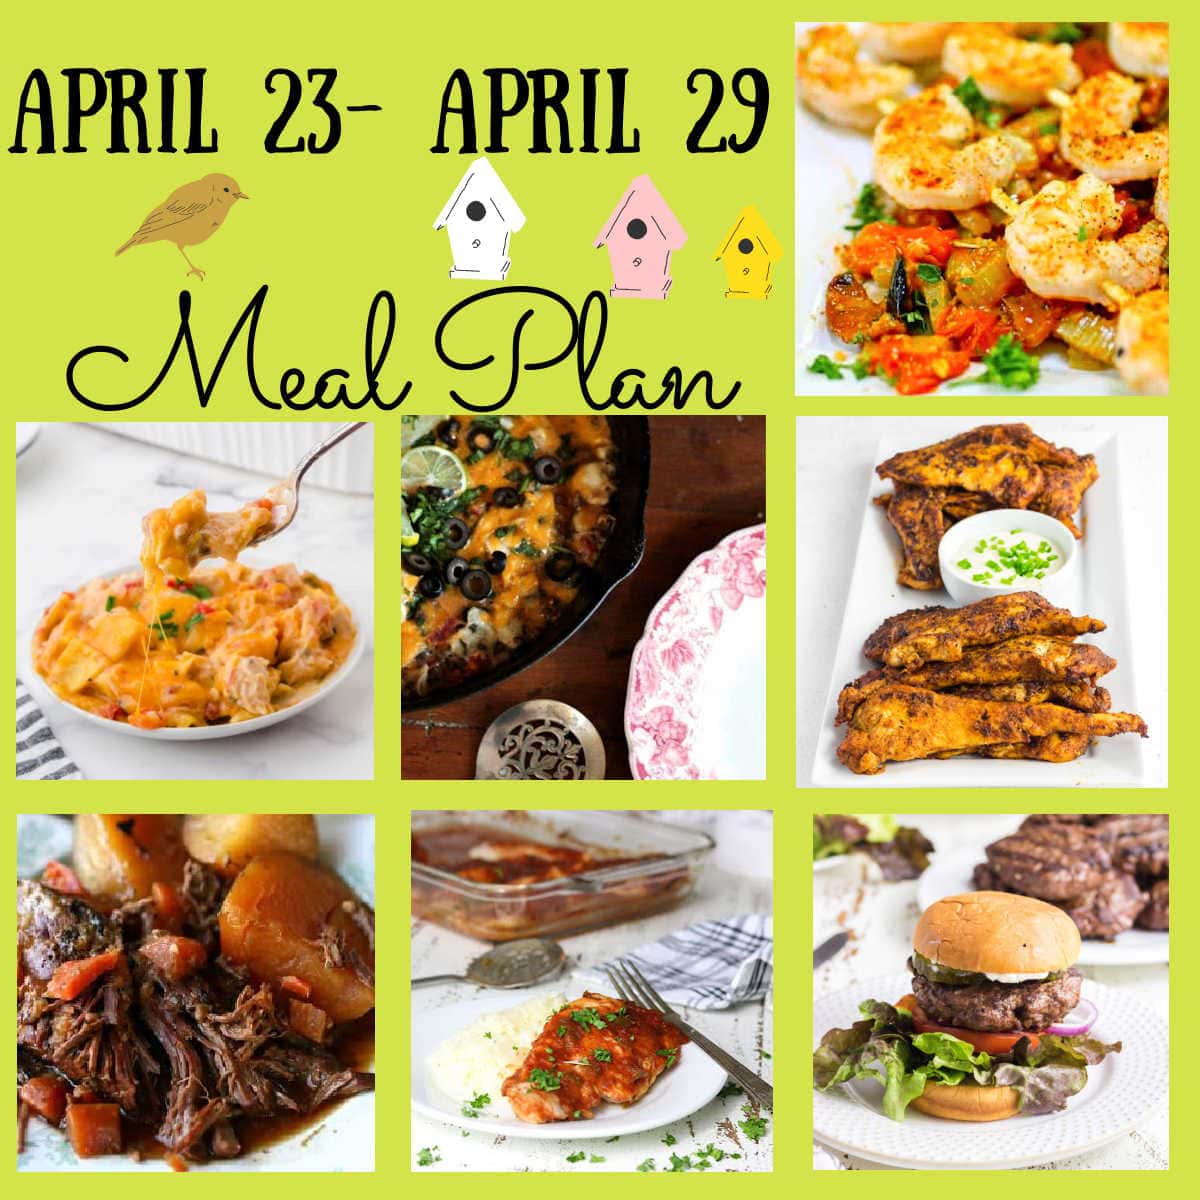 Collage of images for this week's meal plan.